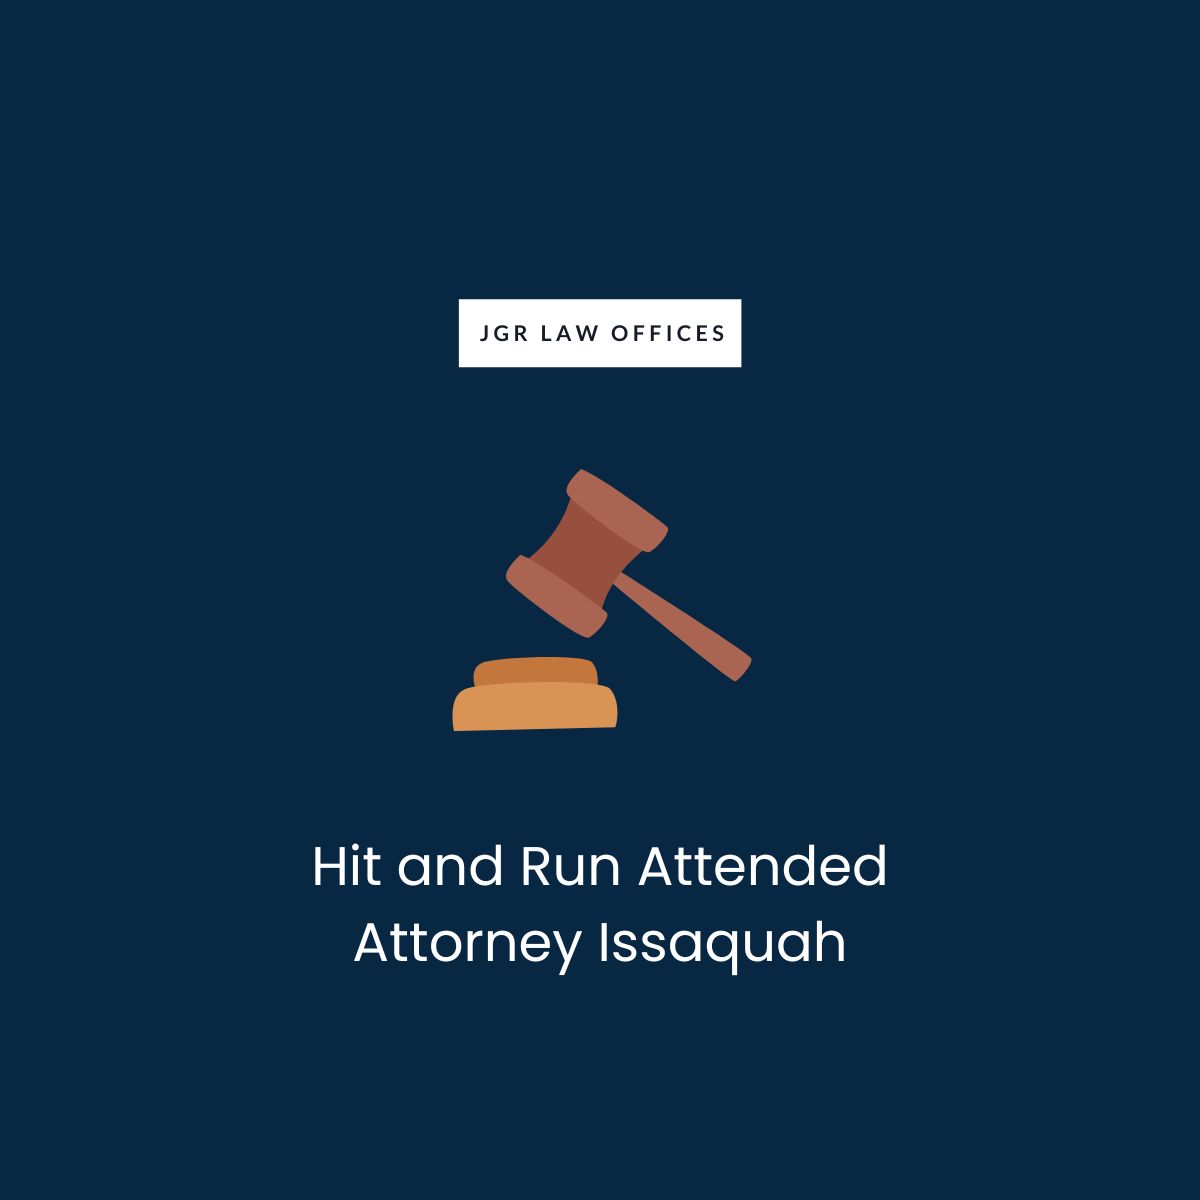 Hit and Run Attended Attorney Issaquah